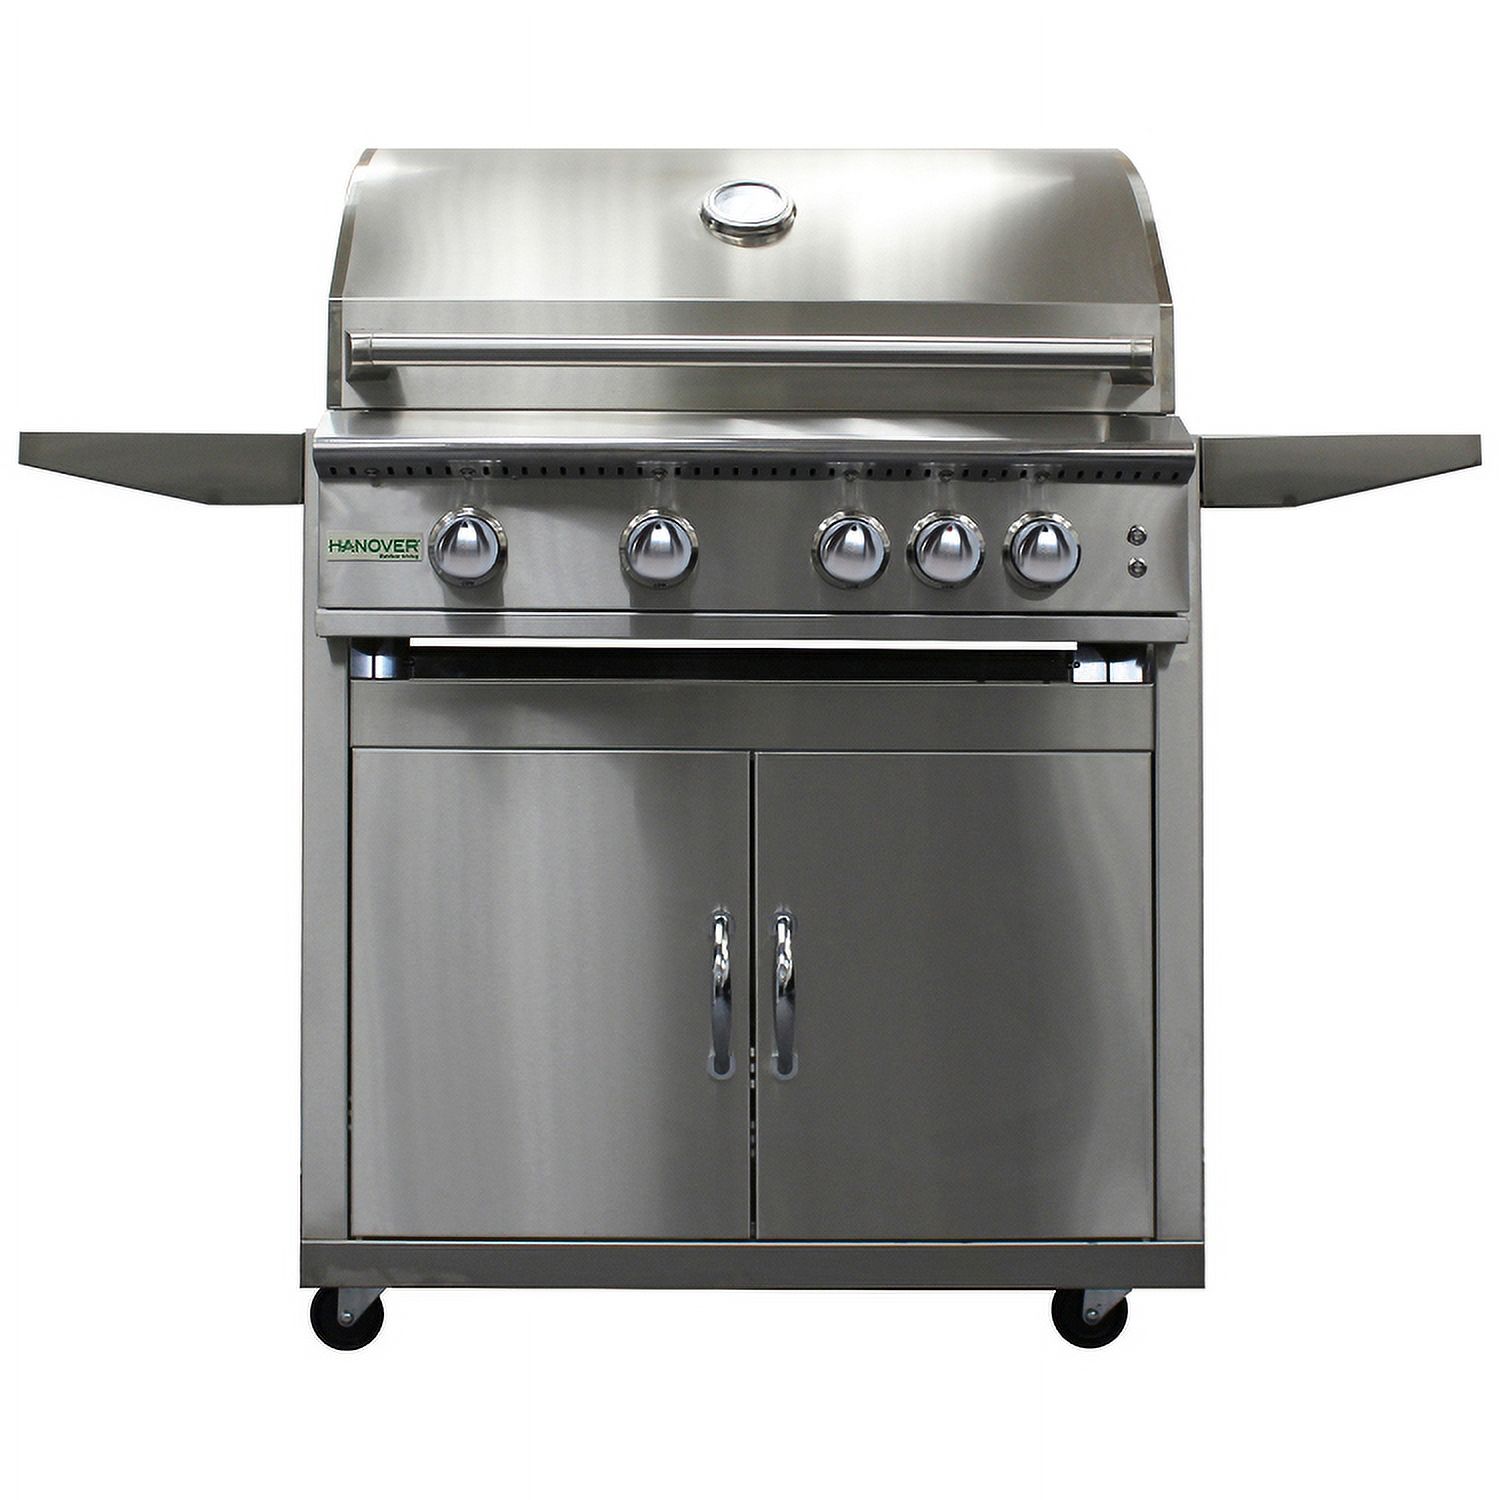 Hanover Grills 40" 5-Burner Liquid Propane Grill with Cart - image 2 of 2